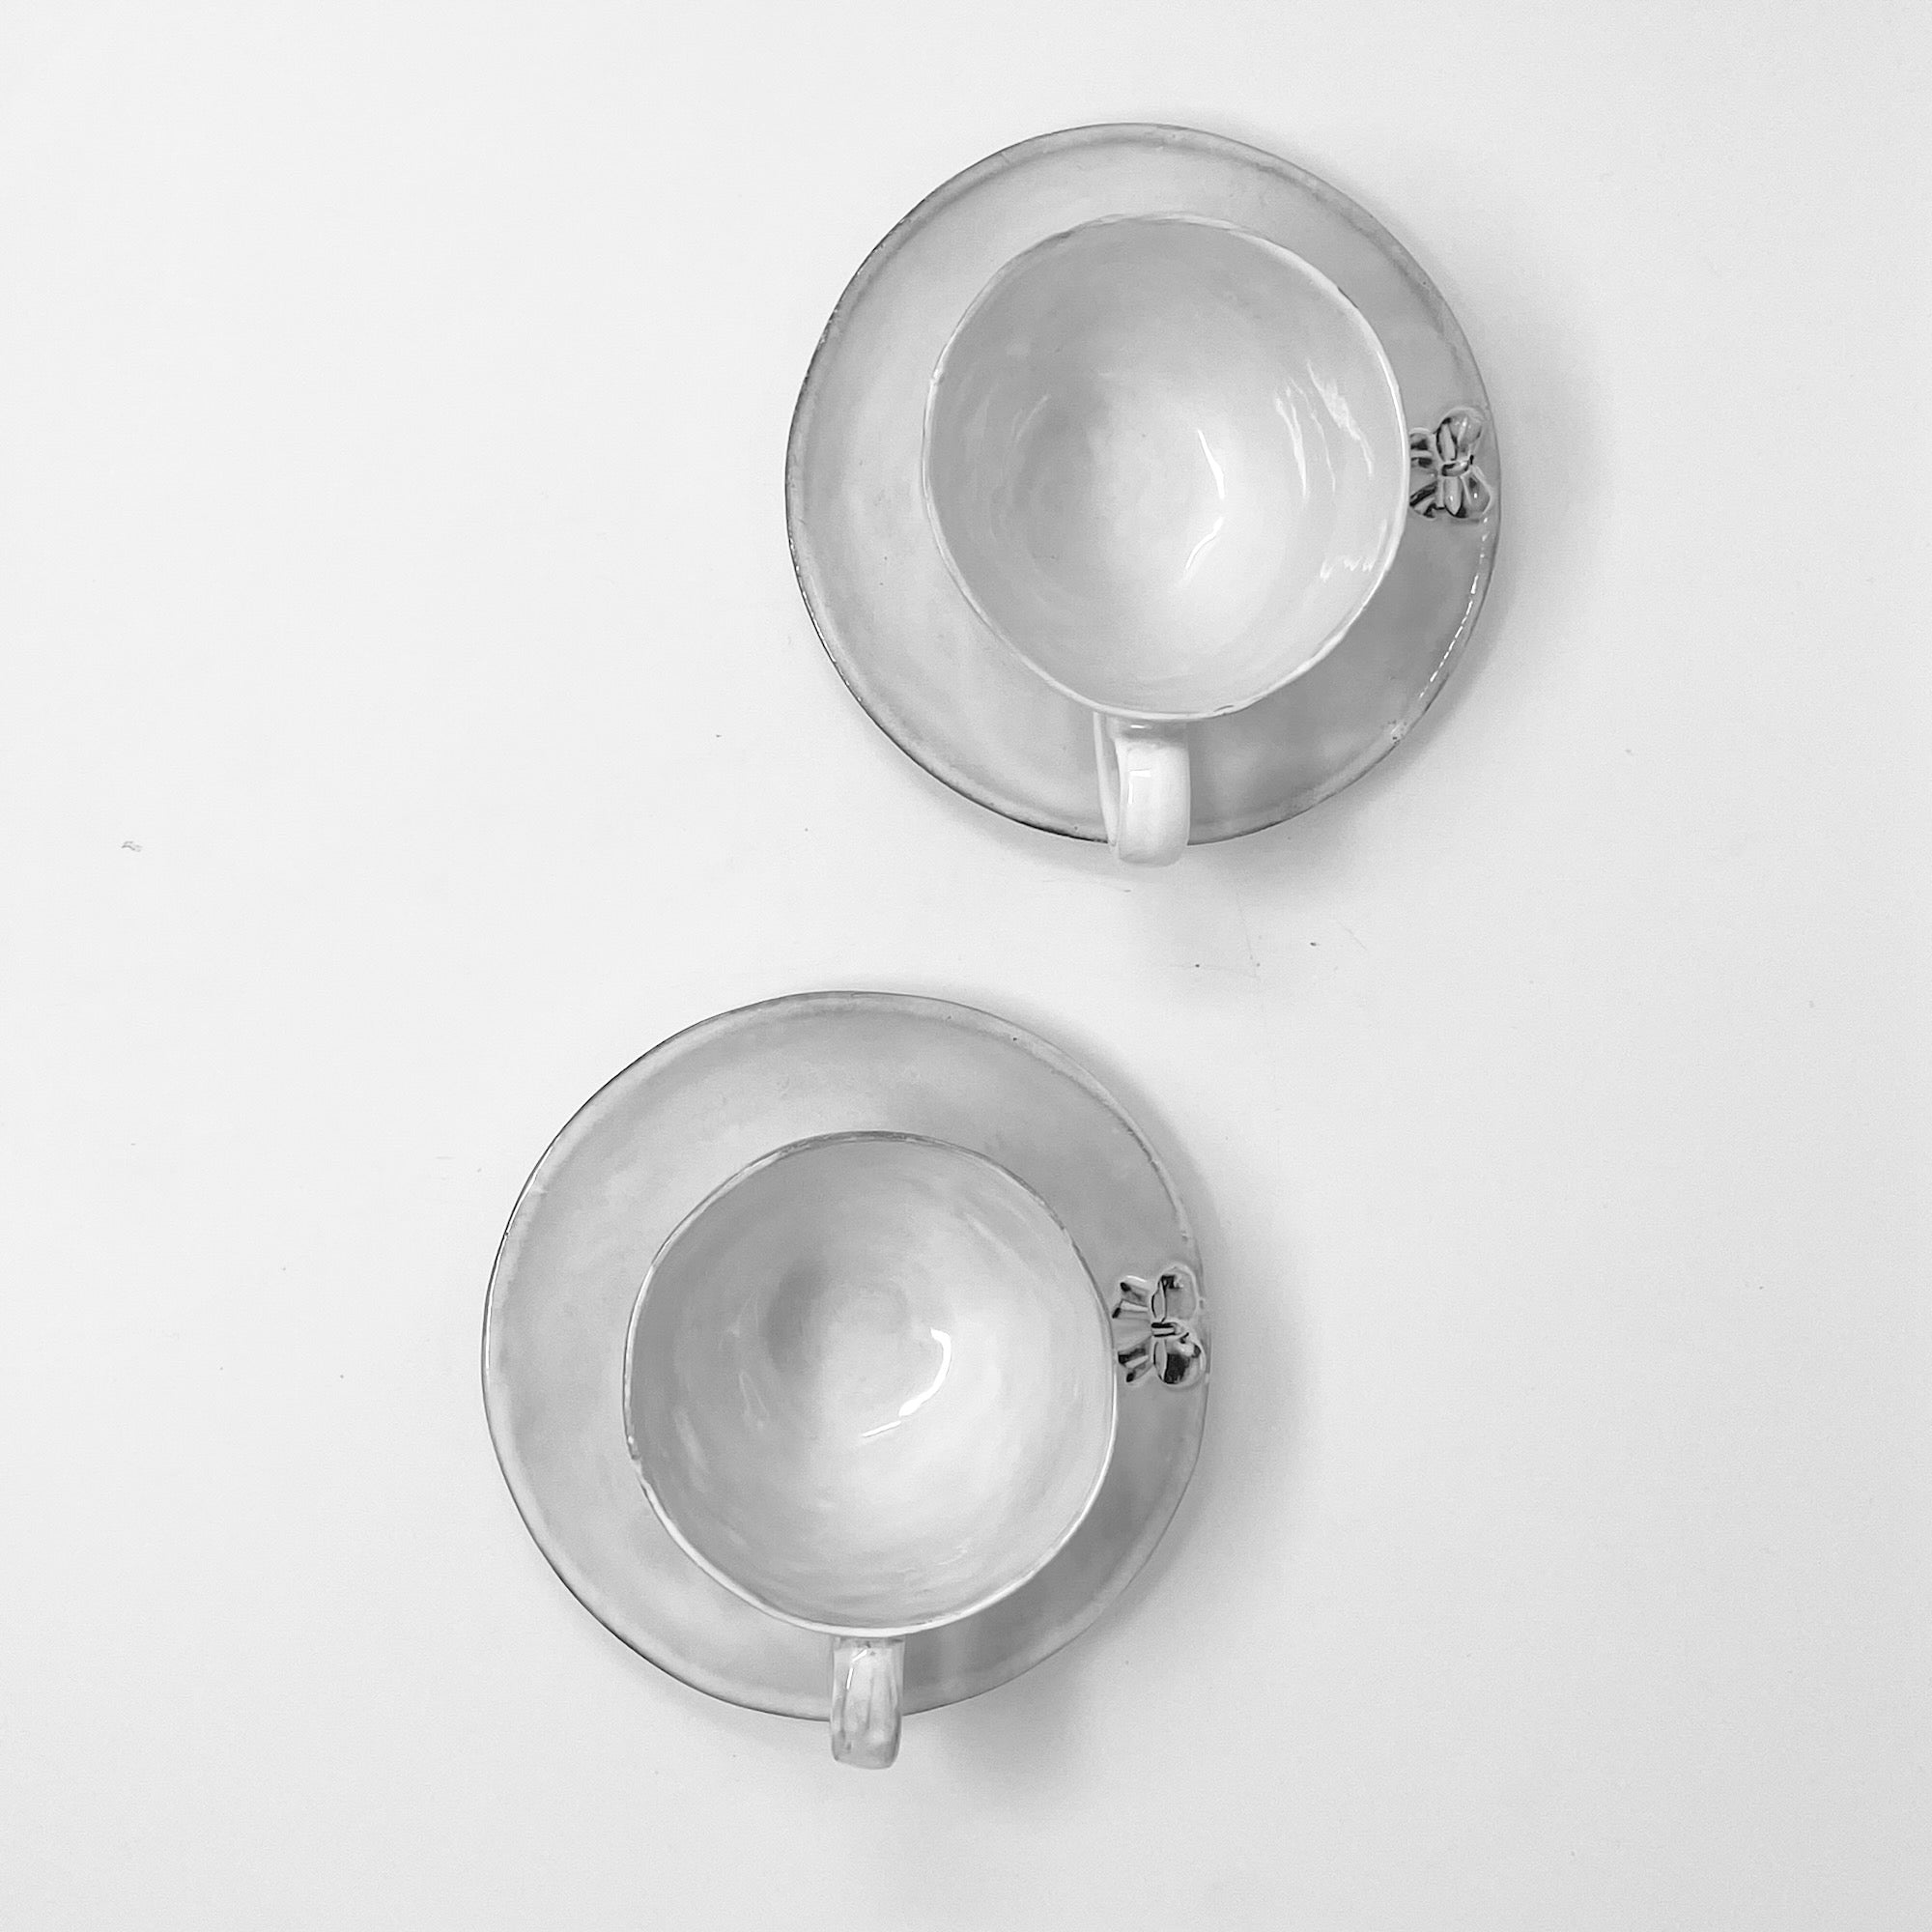 2x Cups and saucers set